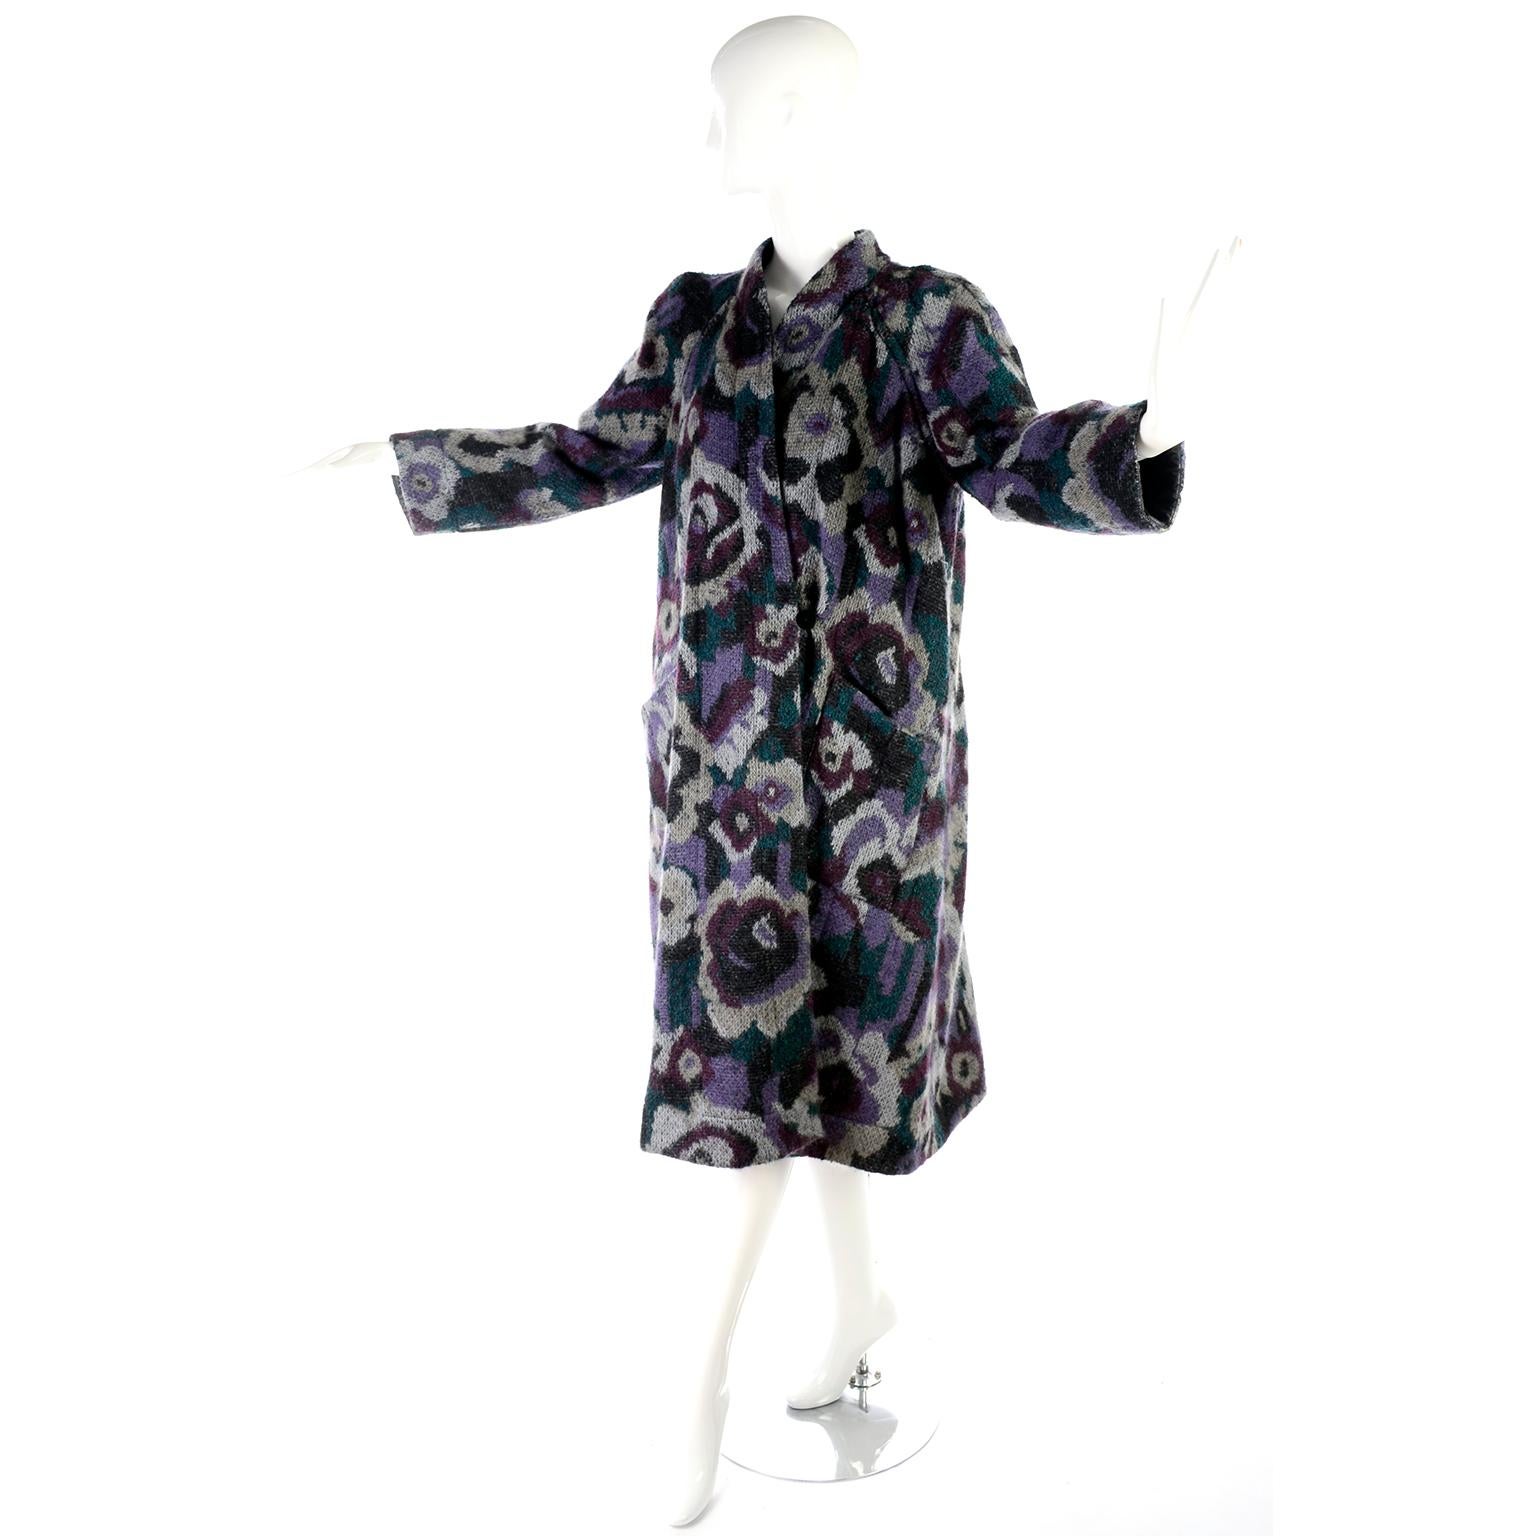 This is a fantastic vintage 1980's reversible 2 in 1 Missoni coat! This vintage puffer coat has a black nylon side, with covered flap pockets and vertical seams. This coat is reversible and can also be worn with the a soft, floral